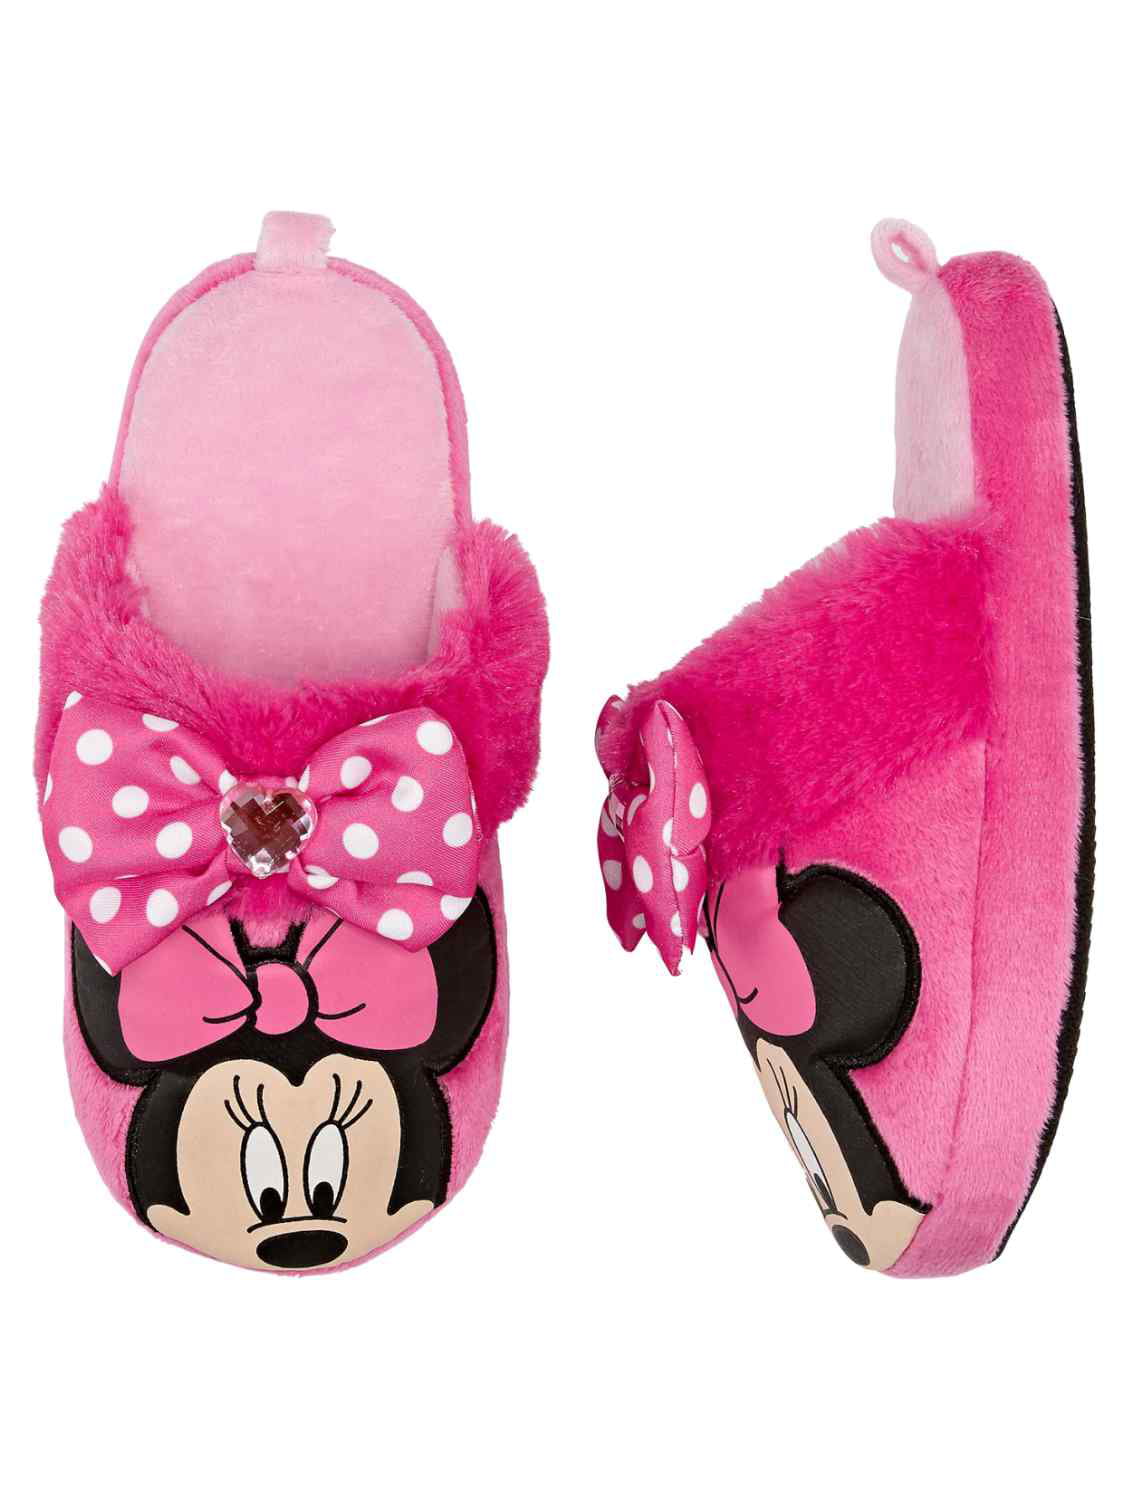 Shoe Sz. 5-7 MINNIE MOUSE Fuzzy Babba Slippers 2T-3T Shoe Sz. 8-10 or 3T-4T